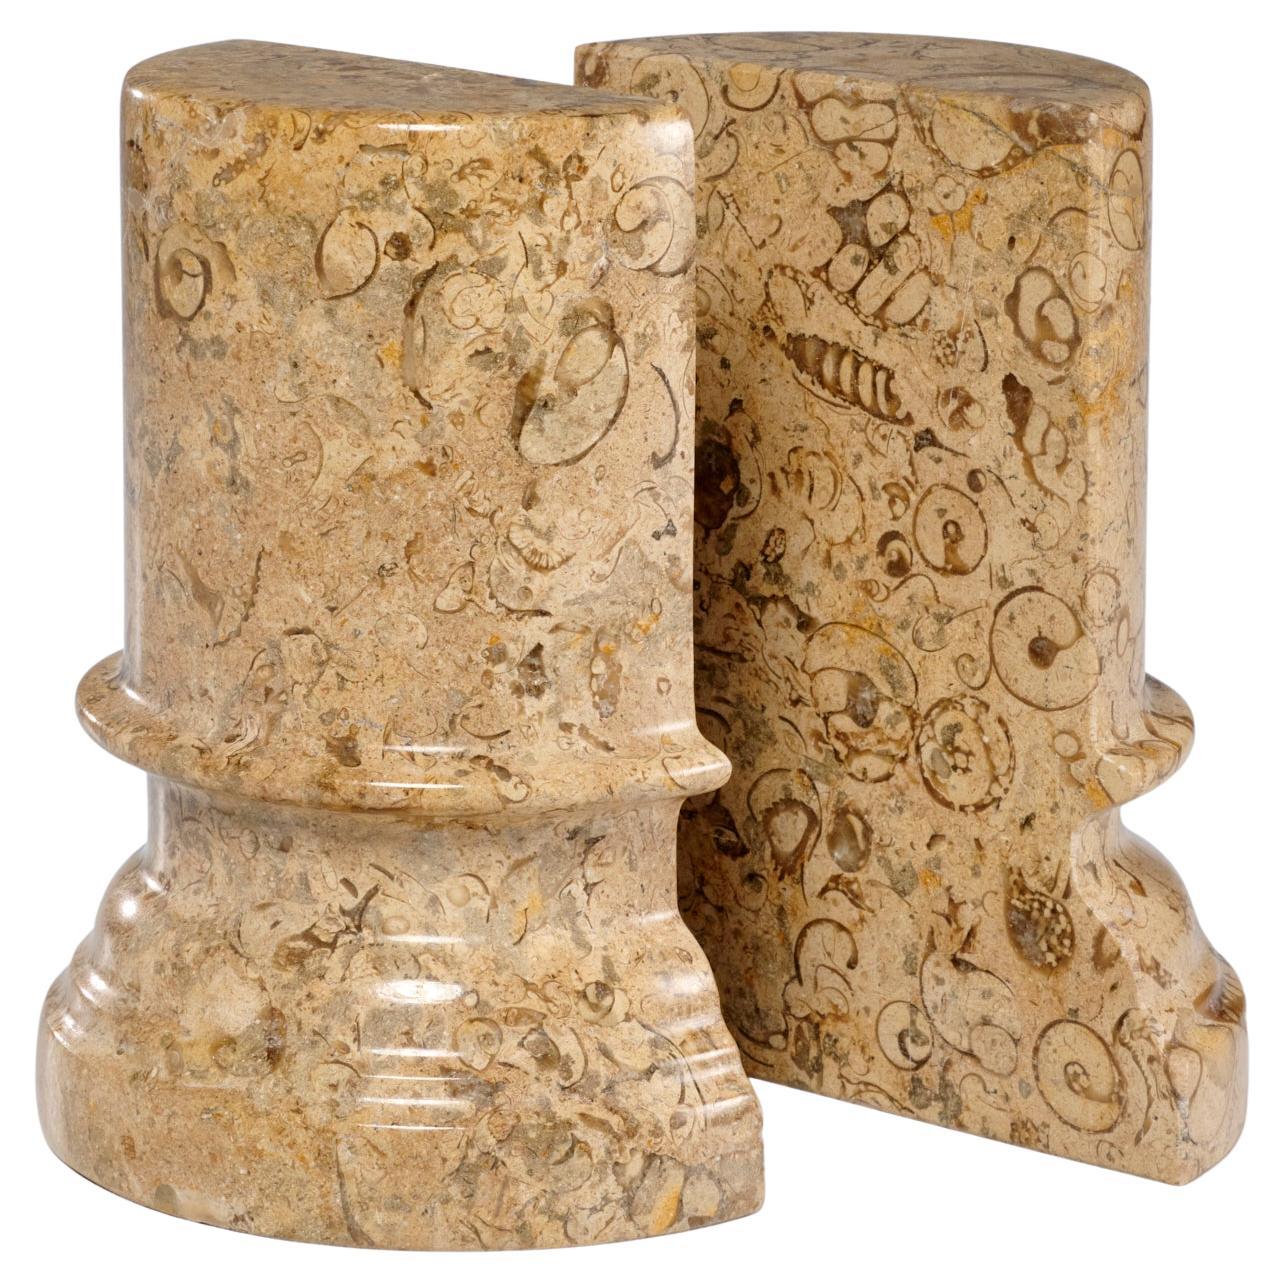 Pair of Carved Fossilized Limestone Bookends with Many Fossils Visible For Sale